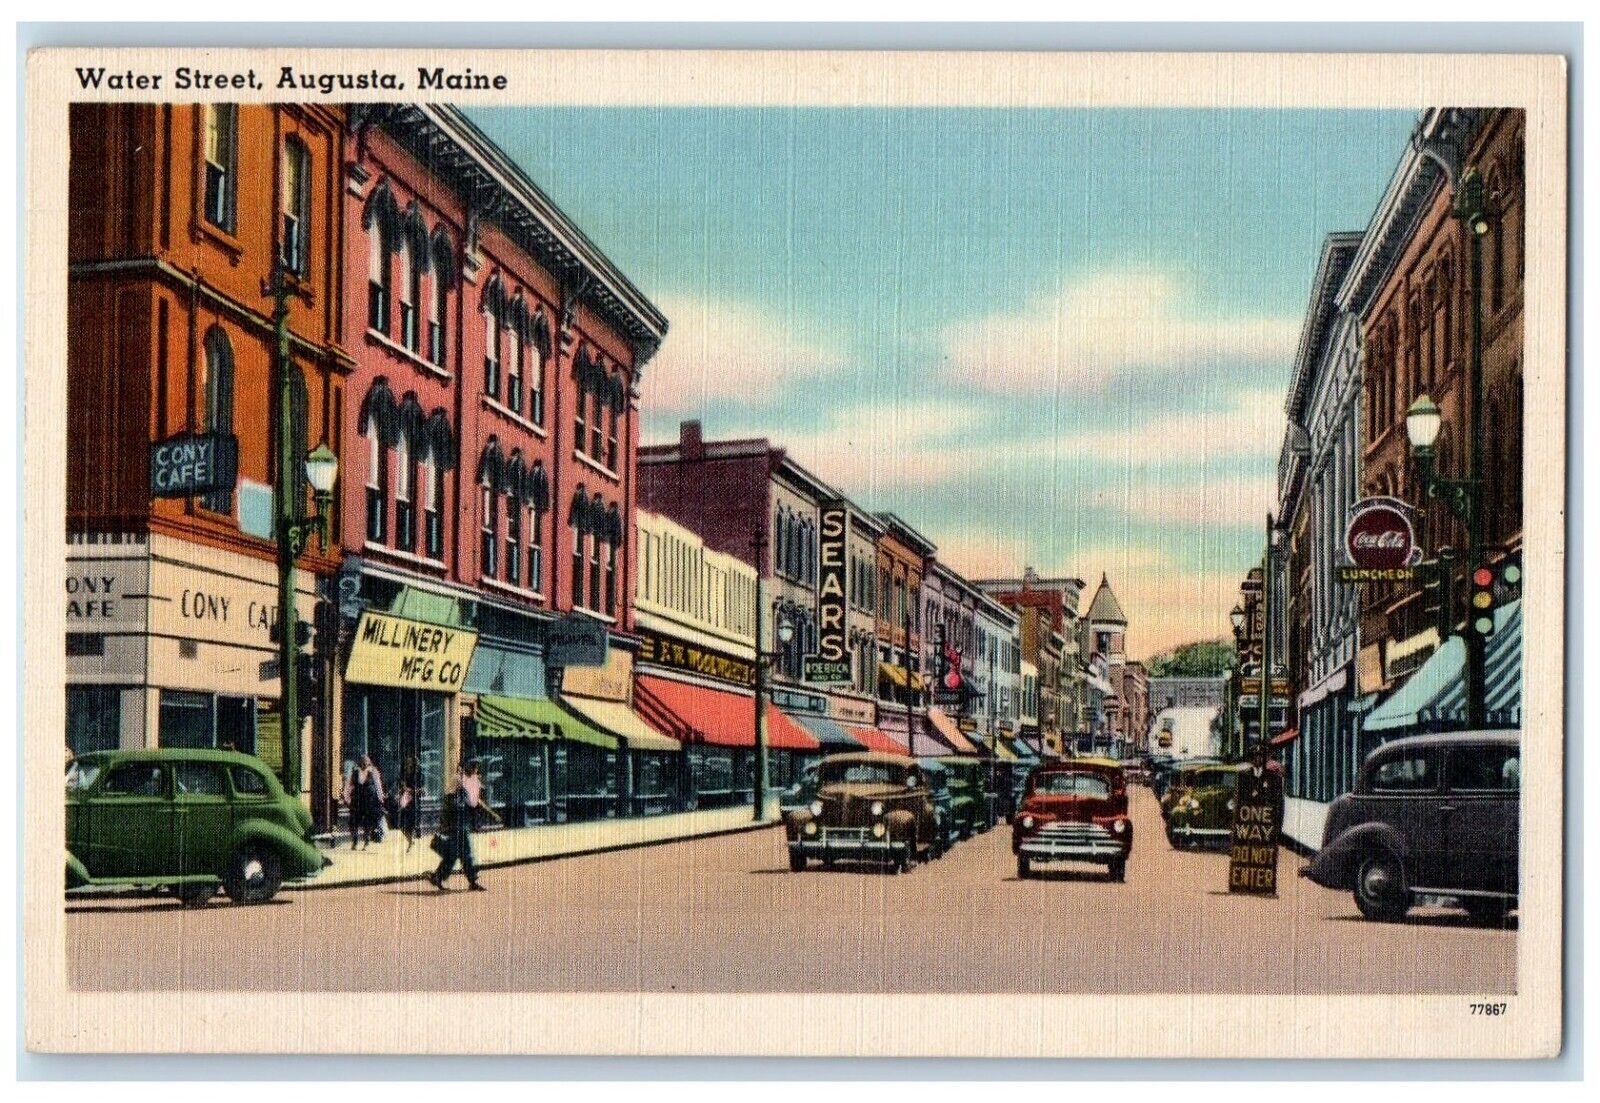 1954 Water Street Cars Cony Cafe Sears Coca Cola Augusta Maine ME Postcard